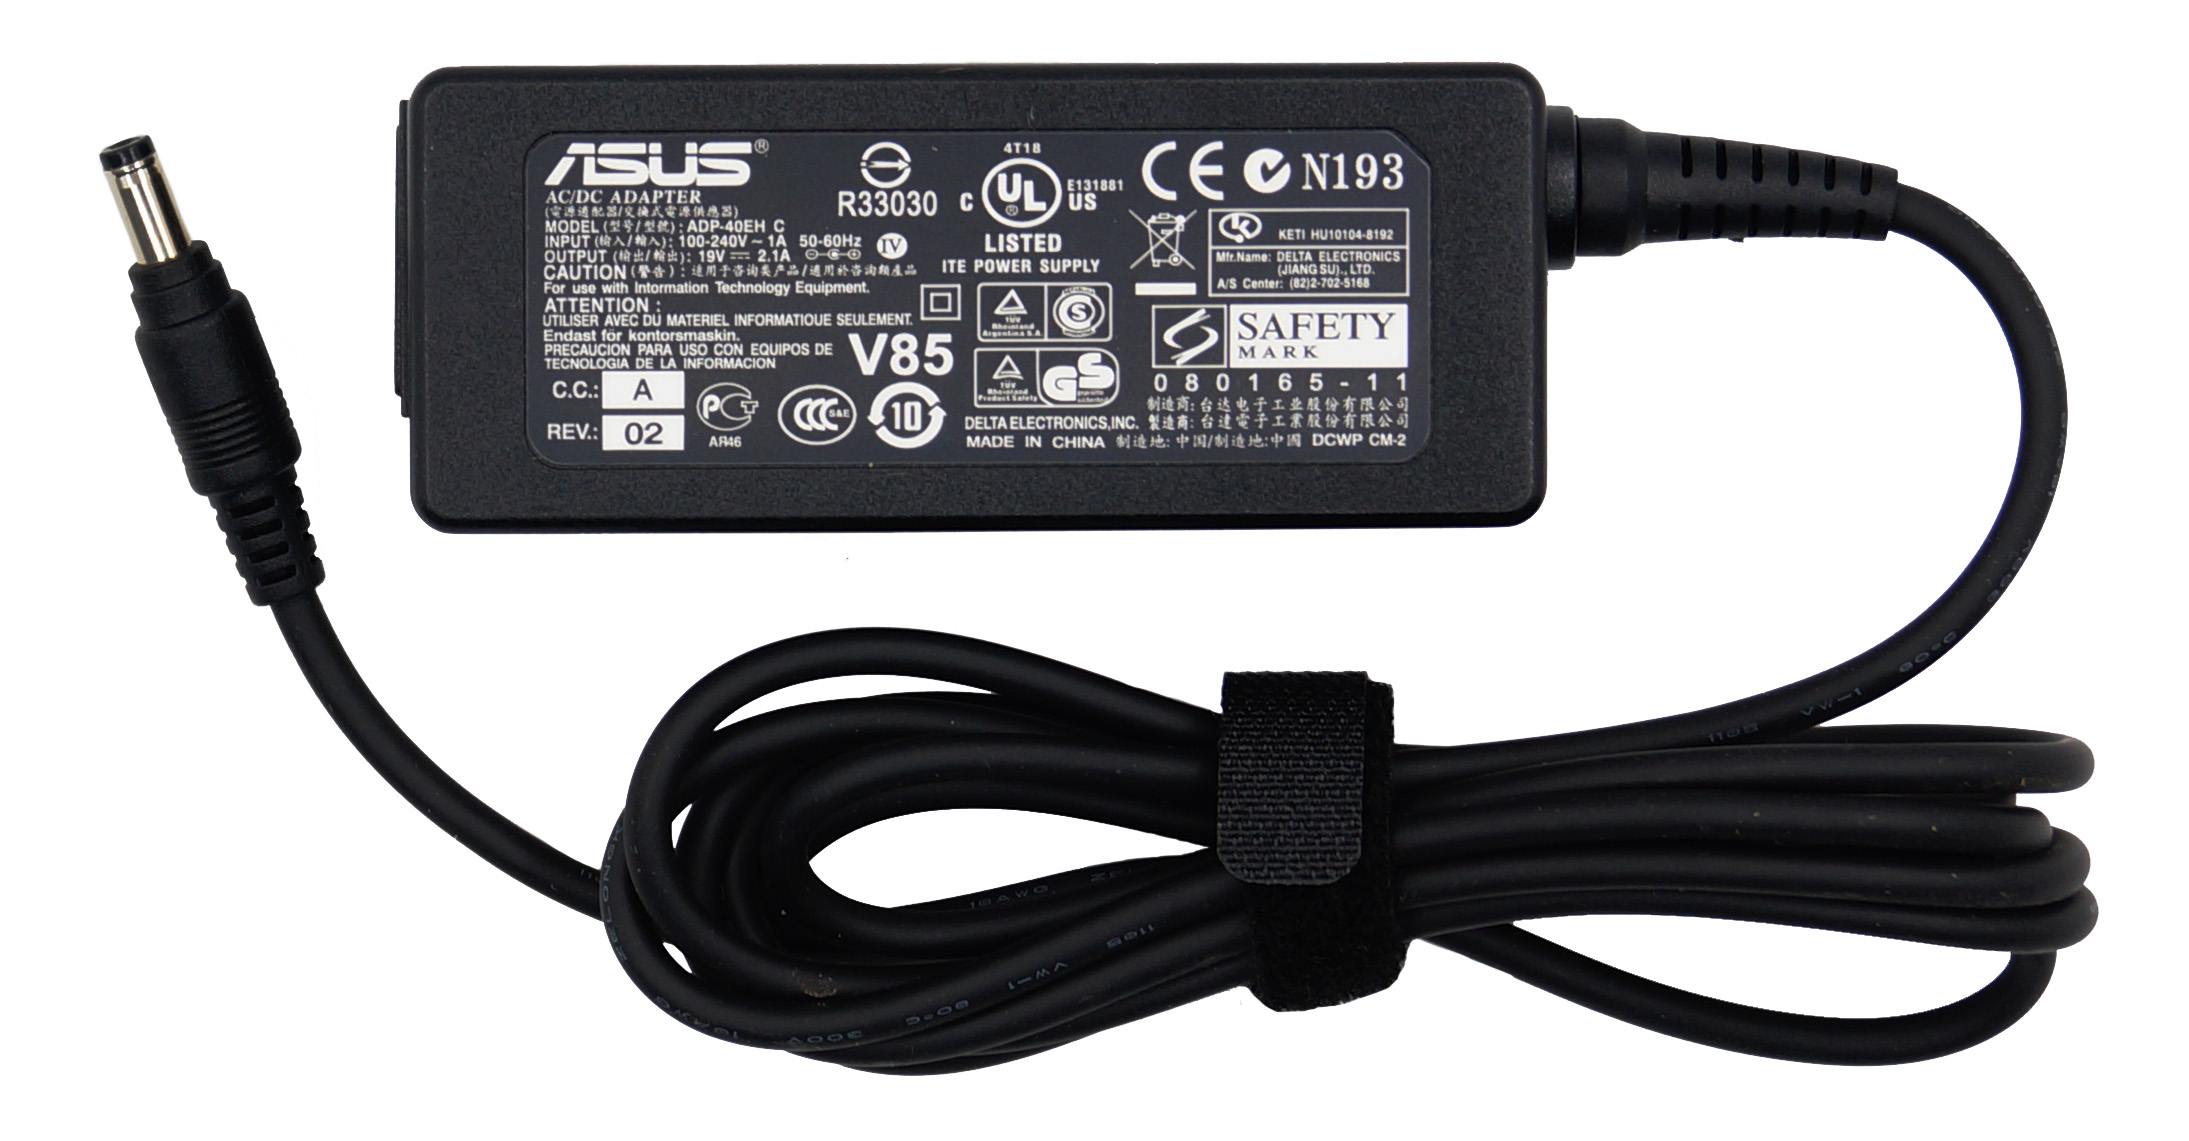   Asus 4.8x1.7, 40W (19V, 2.1A) ORG